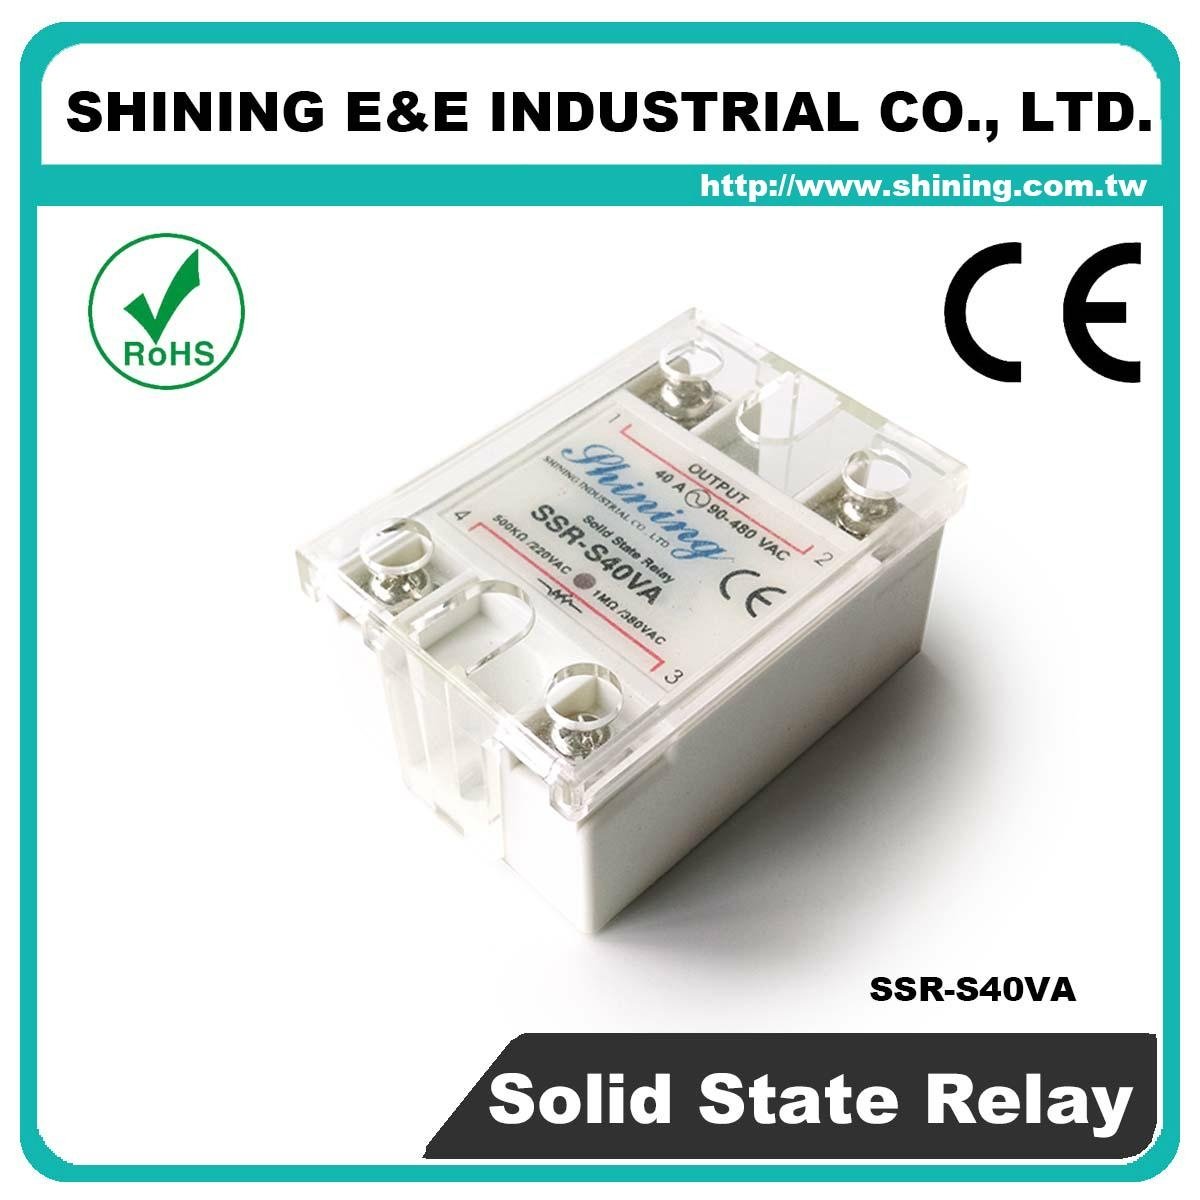 SSR-S40VA Variable Resistor to AC Phase Control Solid State Relay 2